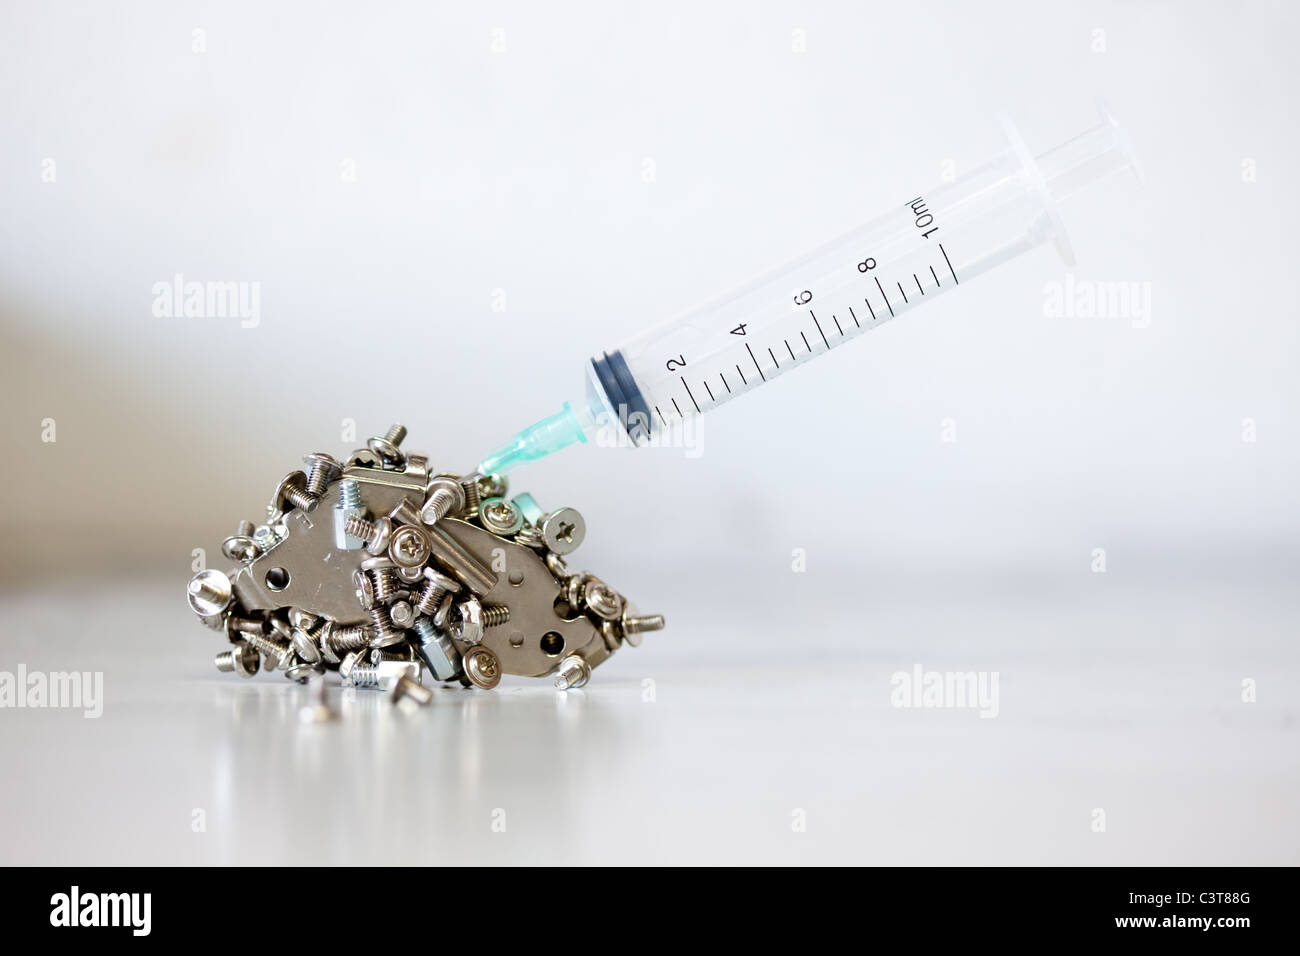 Syringe plunged into a pile of small computer nuts and bolts Stock Photo